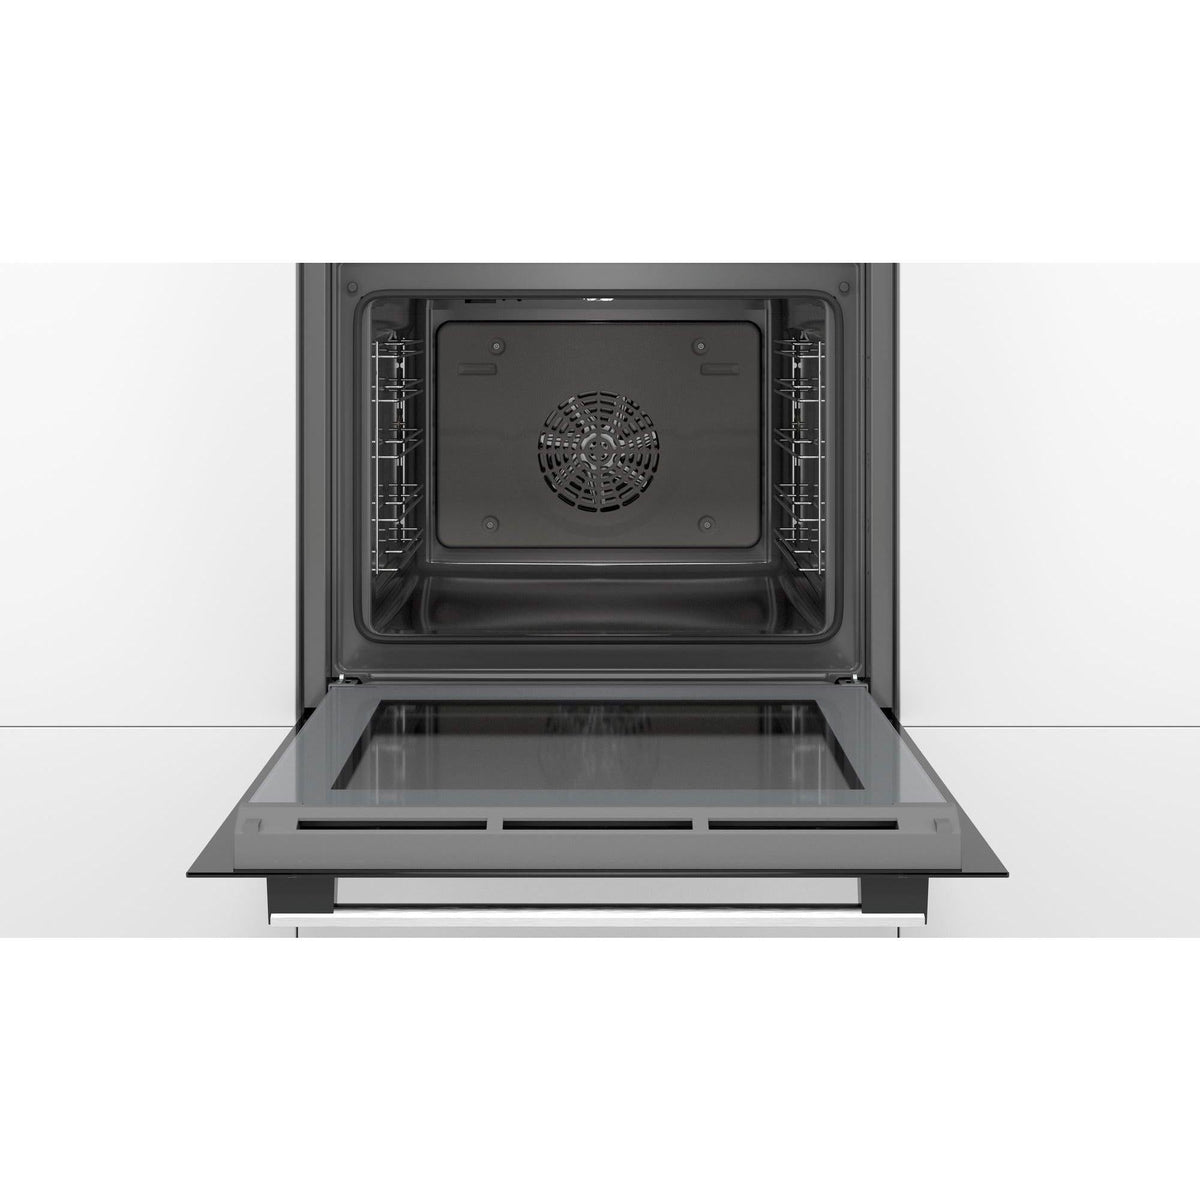 Bosch Serie 4 Built-In Multifunction Electric Single Oven - Stainless Steel | HBS534BS0B from DID Electrical - guaranteed Irish, guaranteed quality service. (6977414496444)